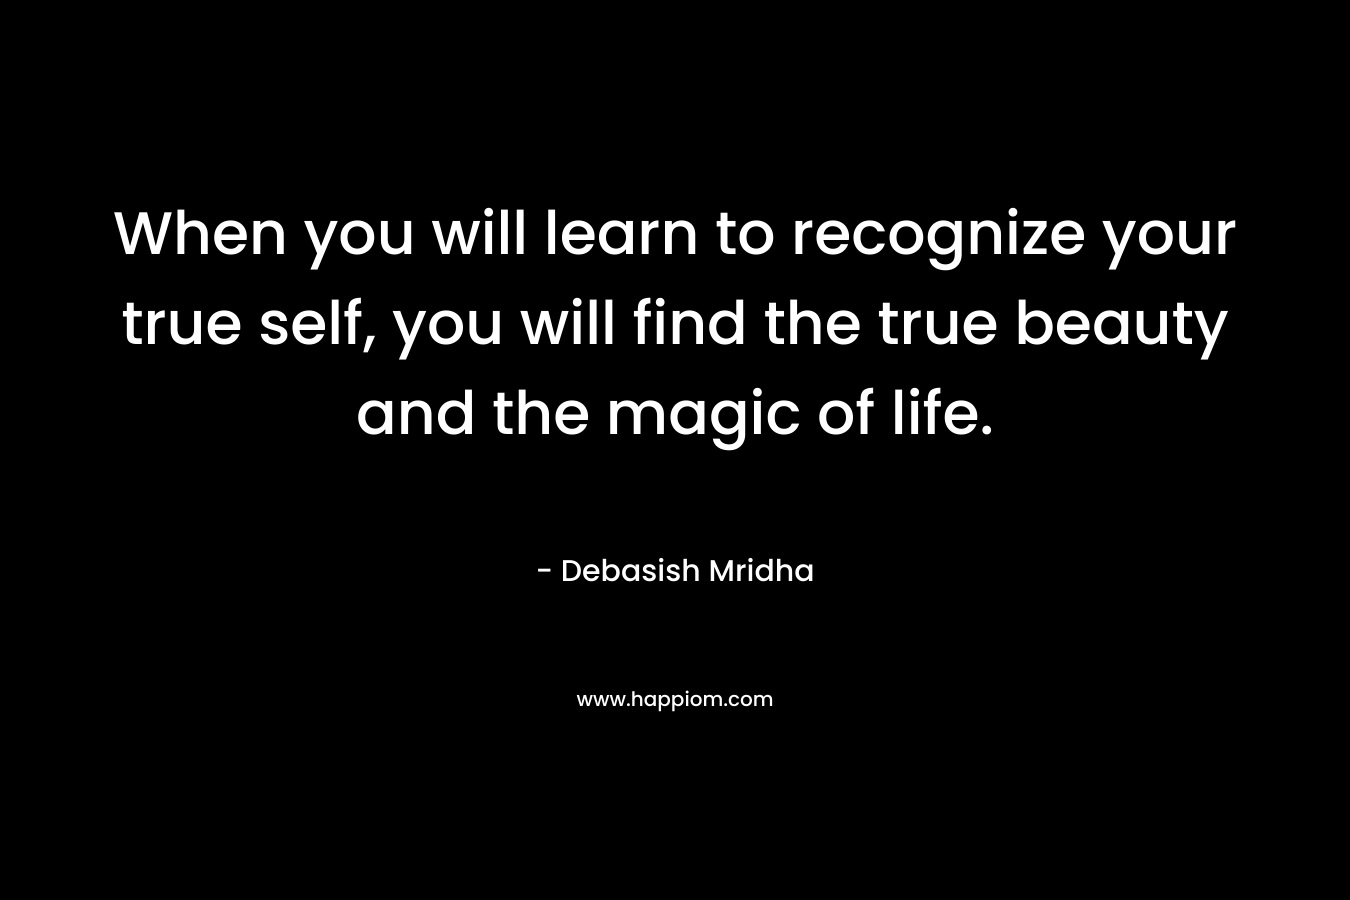 When you will learn to recognize your true self, you will find the true beauty and the magic of life.